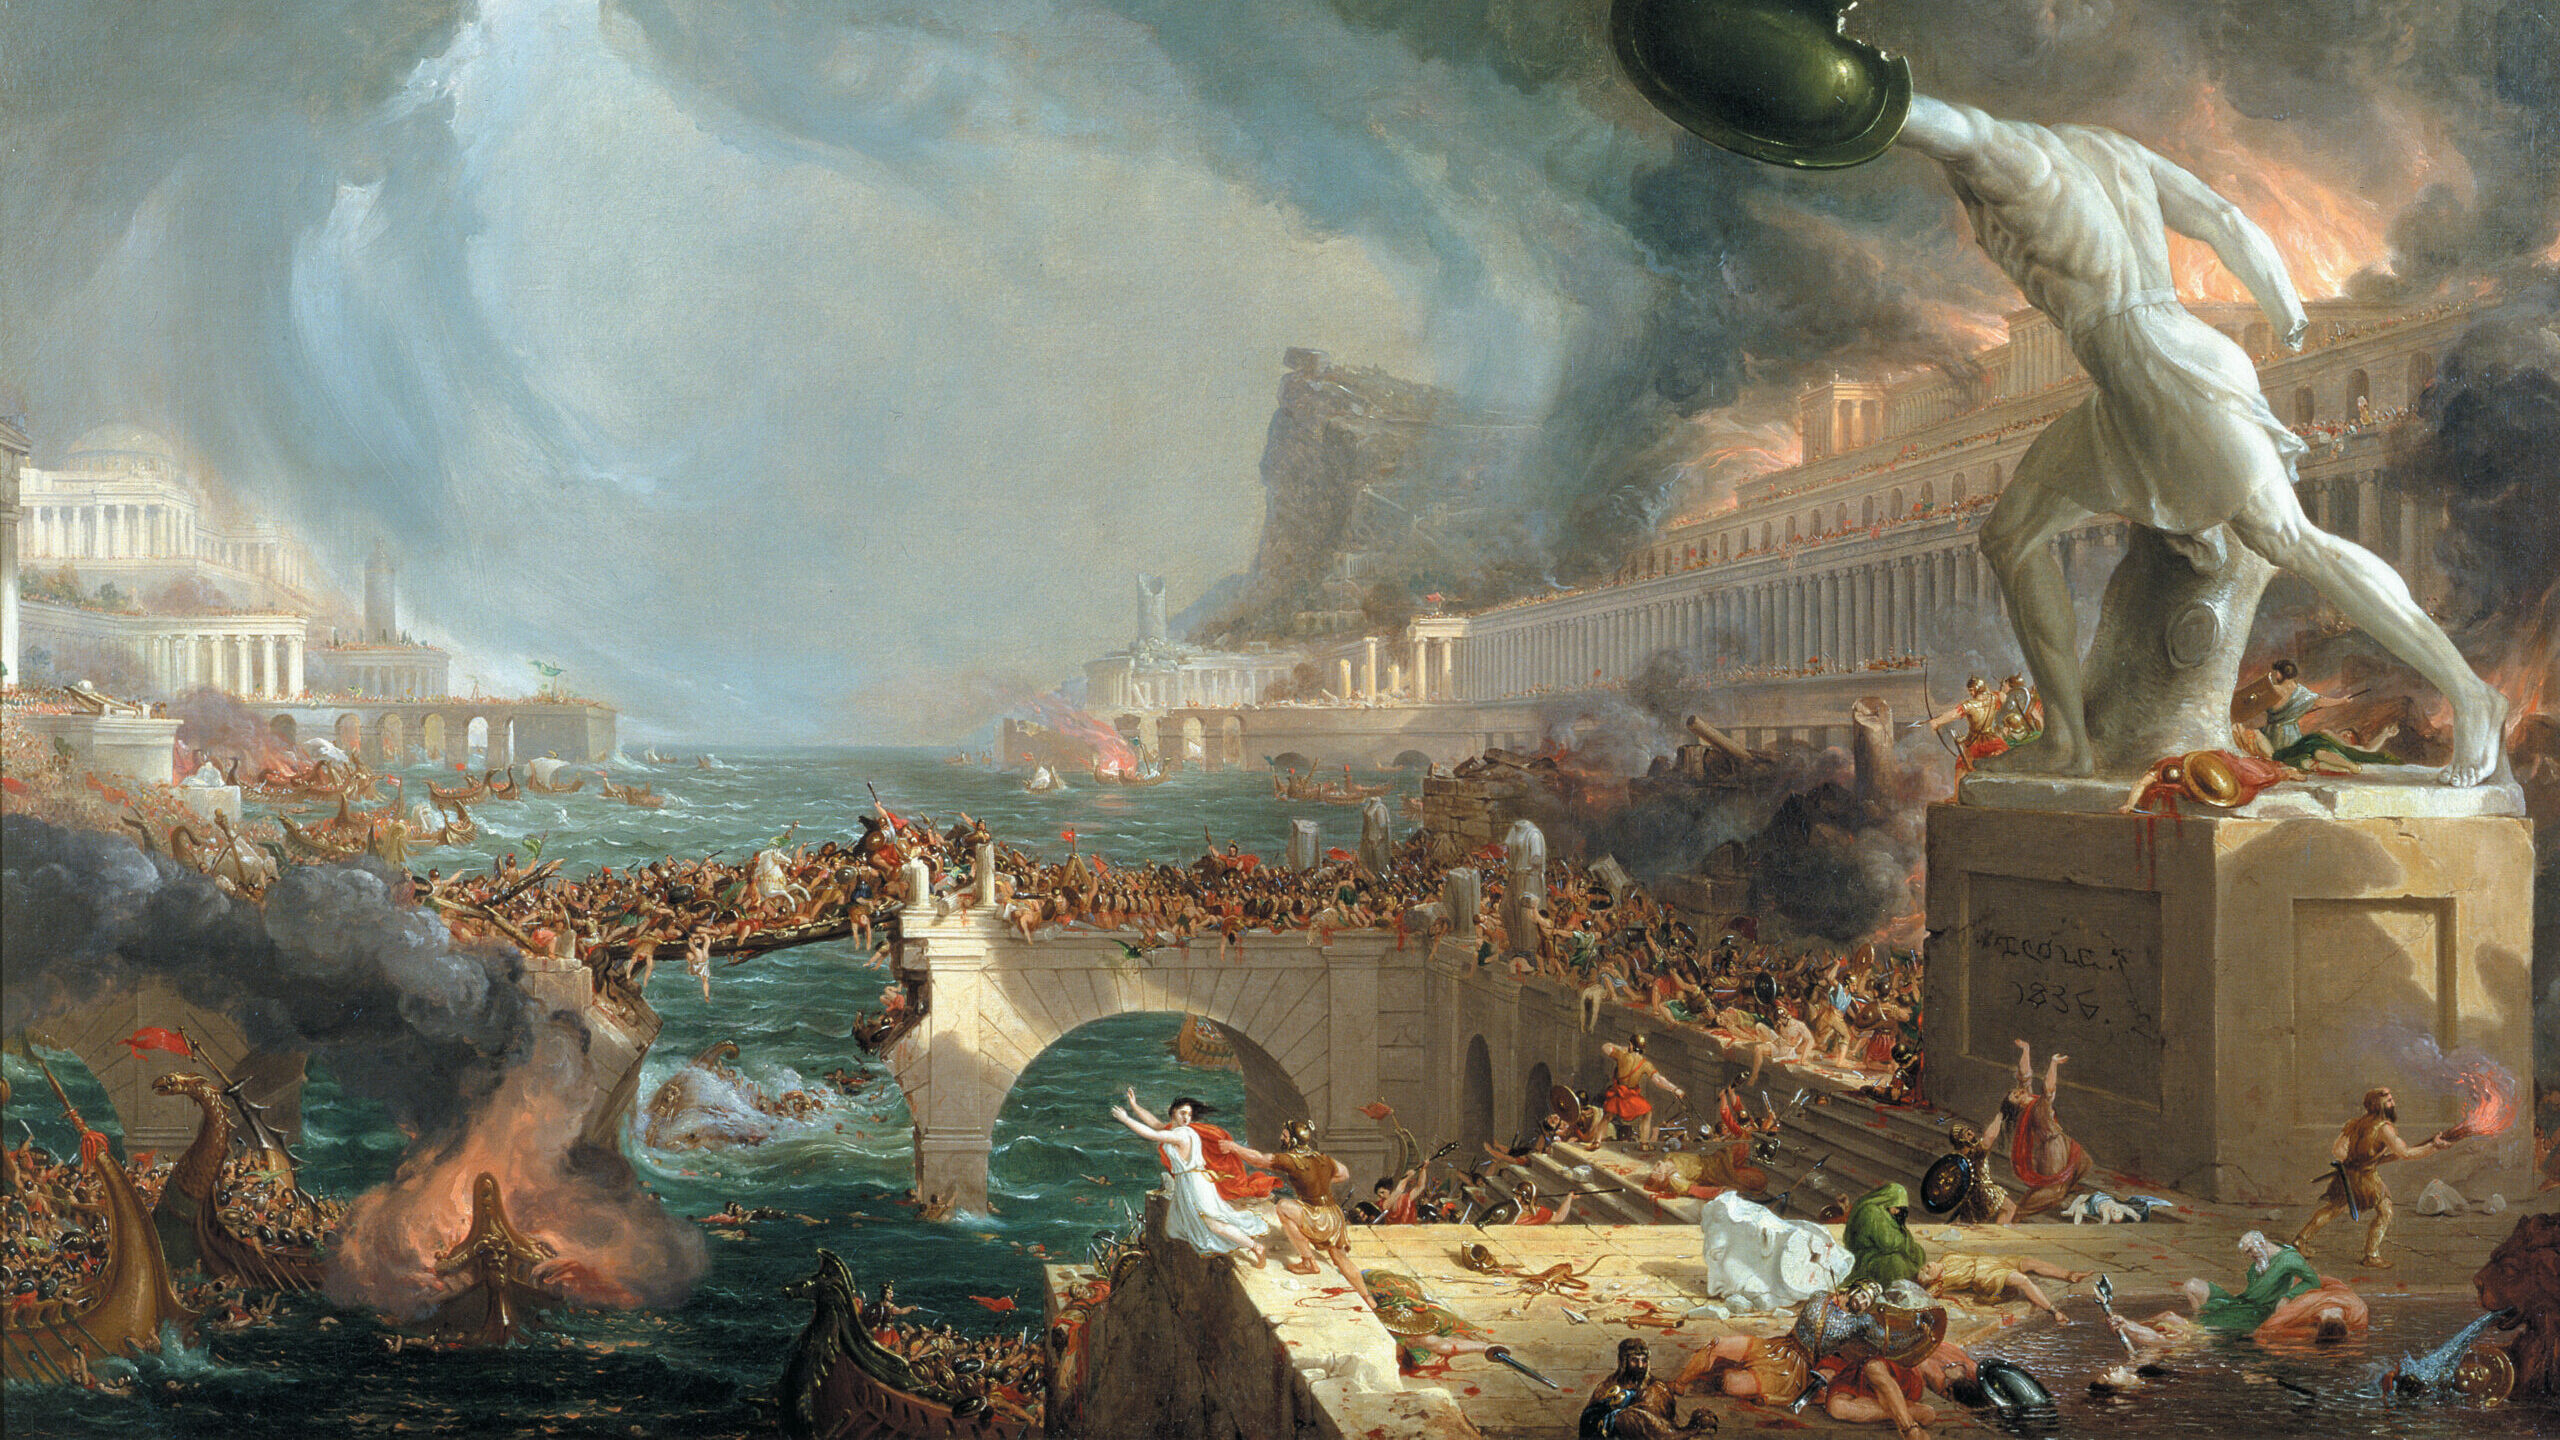 Thick black smoke fills the sky as Rome burns in this allegorical 19th century painting depicting the city’s fall. LEFT: A Roman coin bears the image of Emperor Honorius.